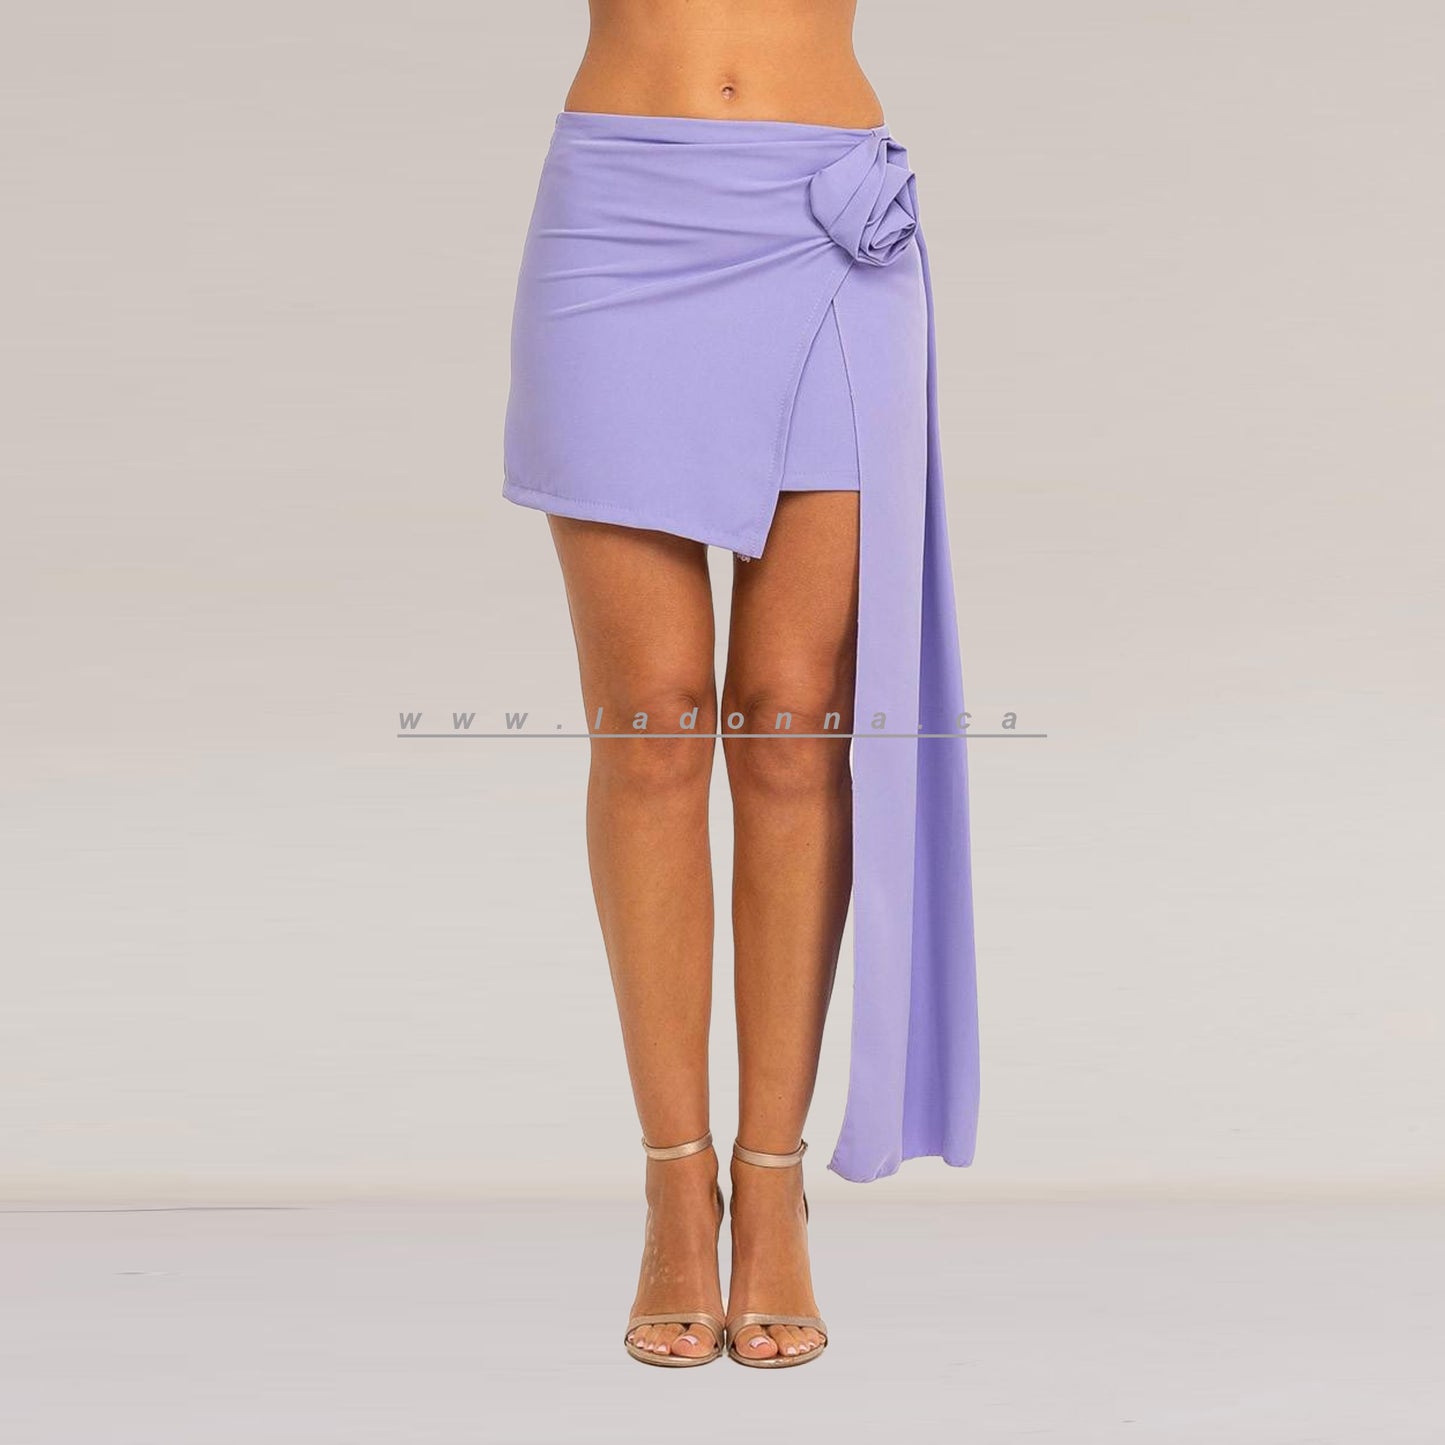 Lilac Mini Skirt featuring a delicate rose